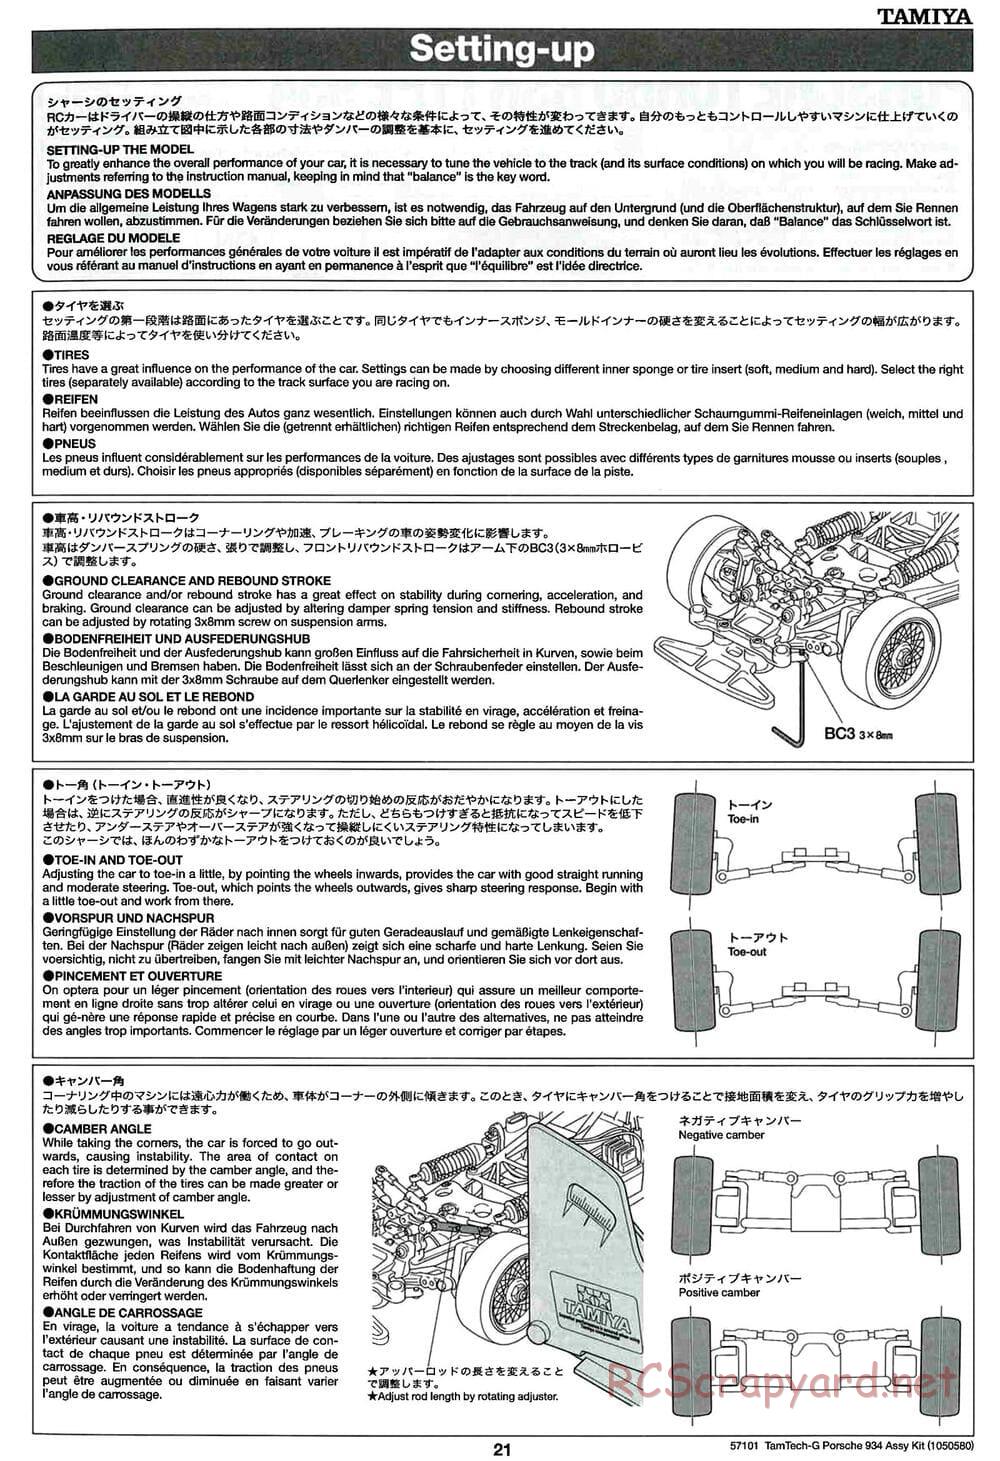 Tamiya - Porsche Turbo RSR - GT-01 Chassis - Manual - Page 21